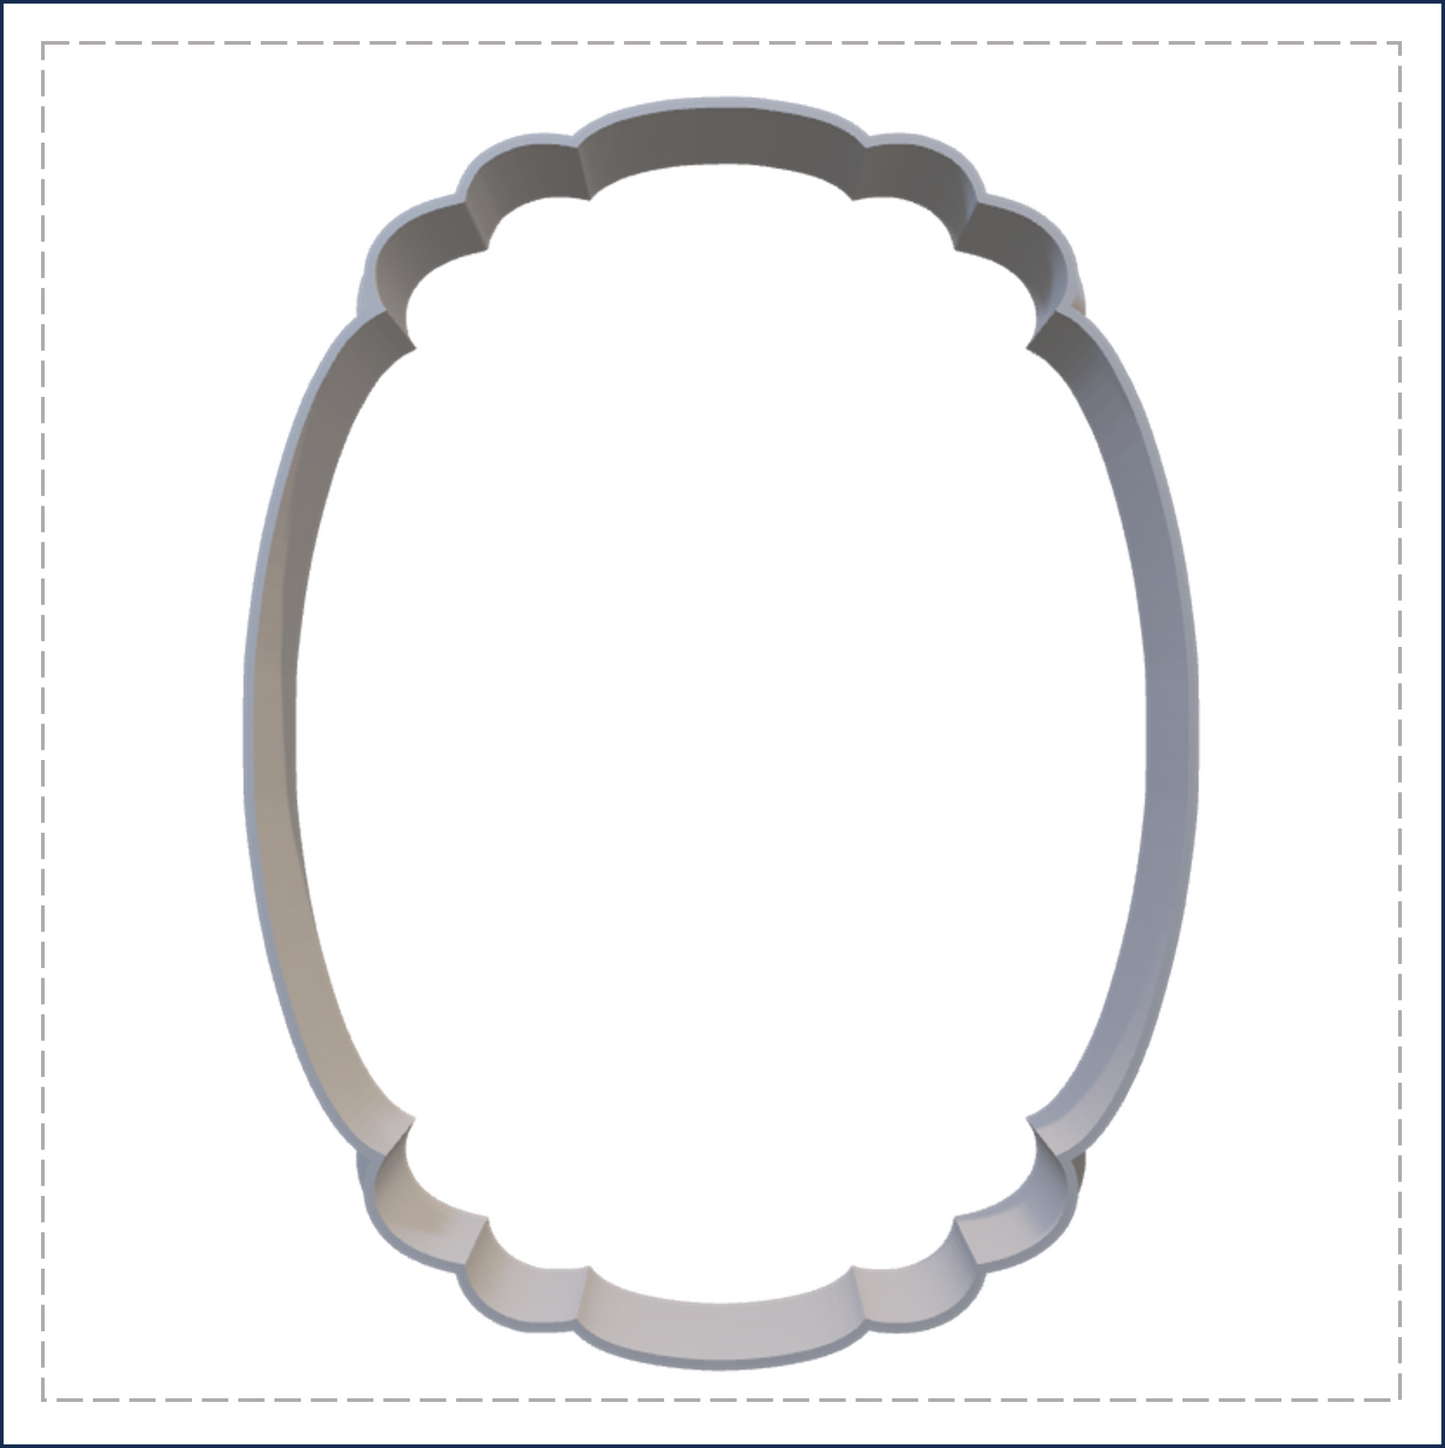 J46 - PICTURE FRAME COOKIE CUTTER